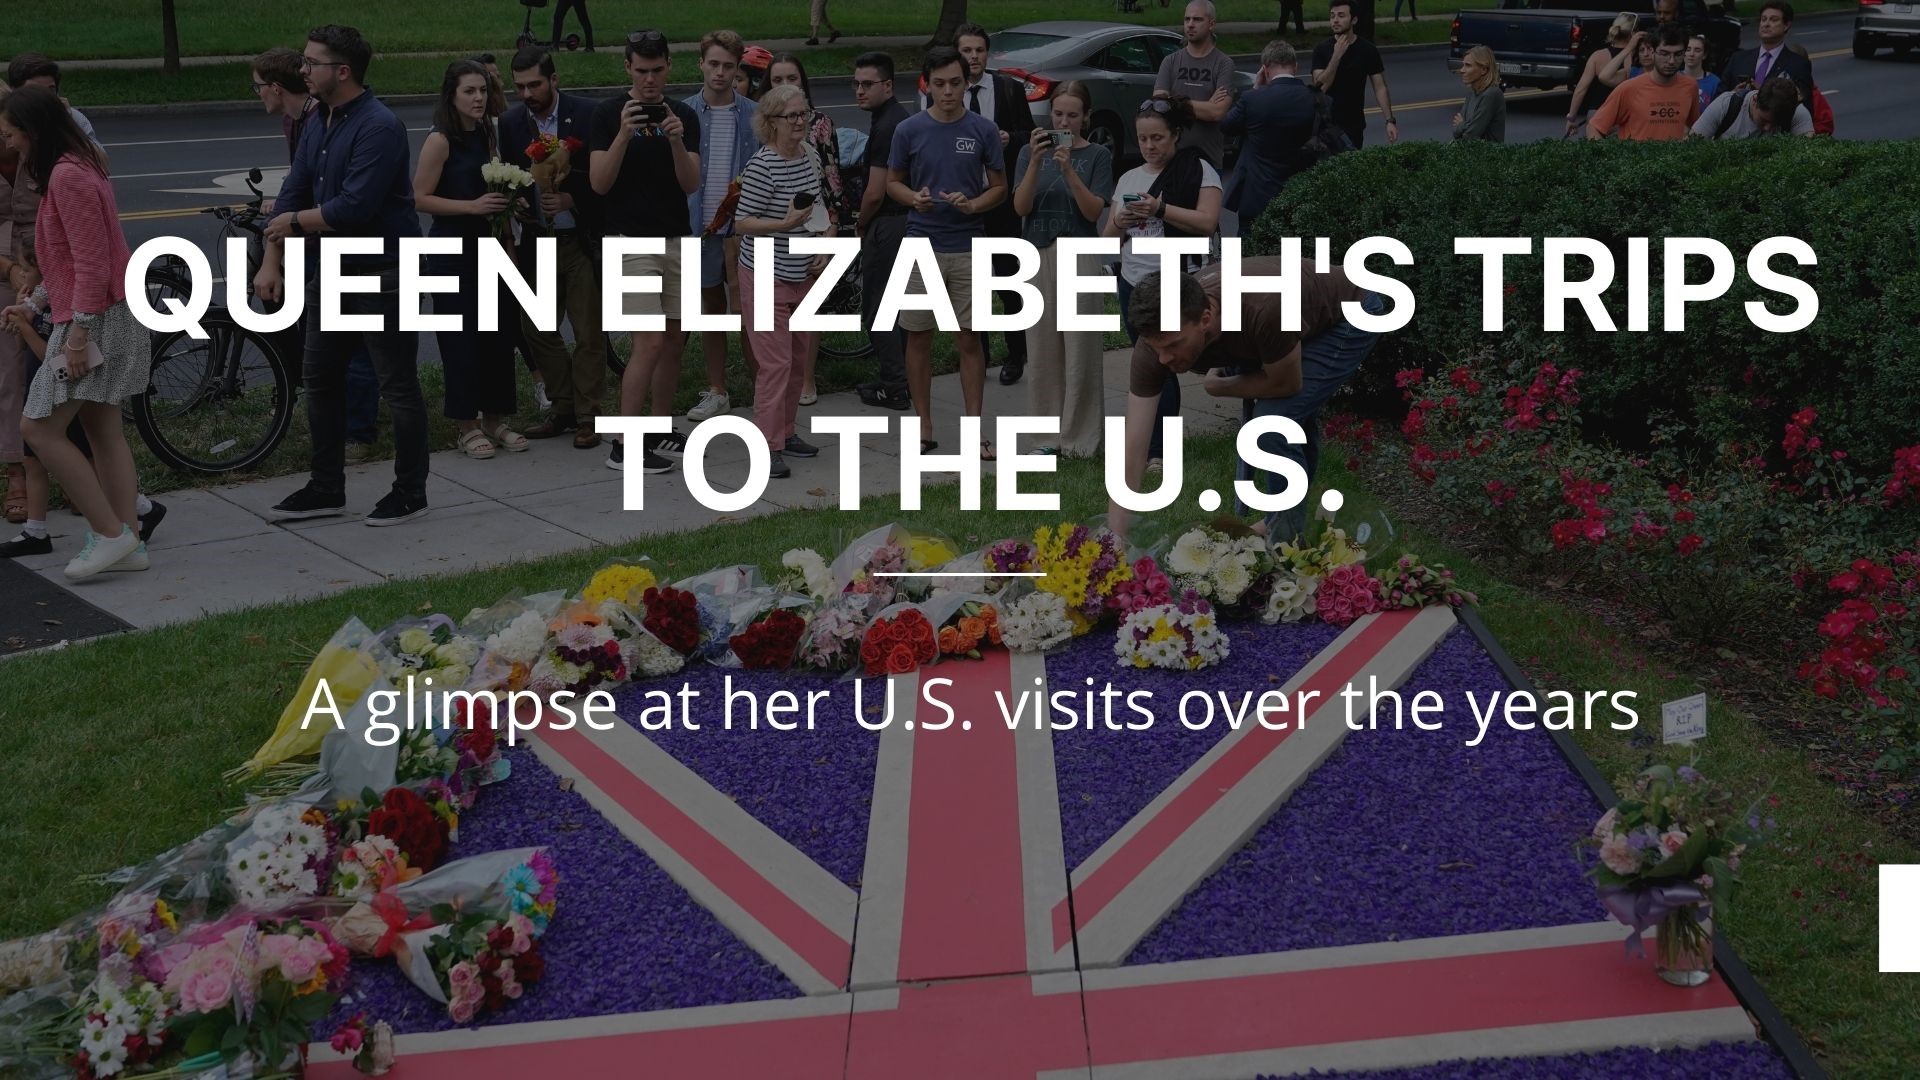 A look back at the life and legacy of Queen Elizabeth II after her death aged 96. Also a glimpse of her visits to the US over the years.